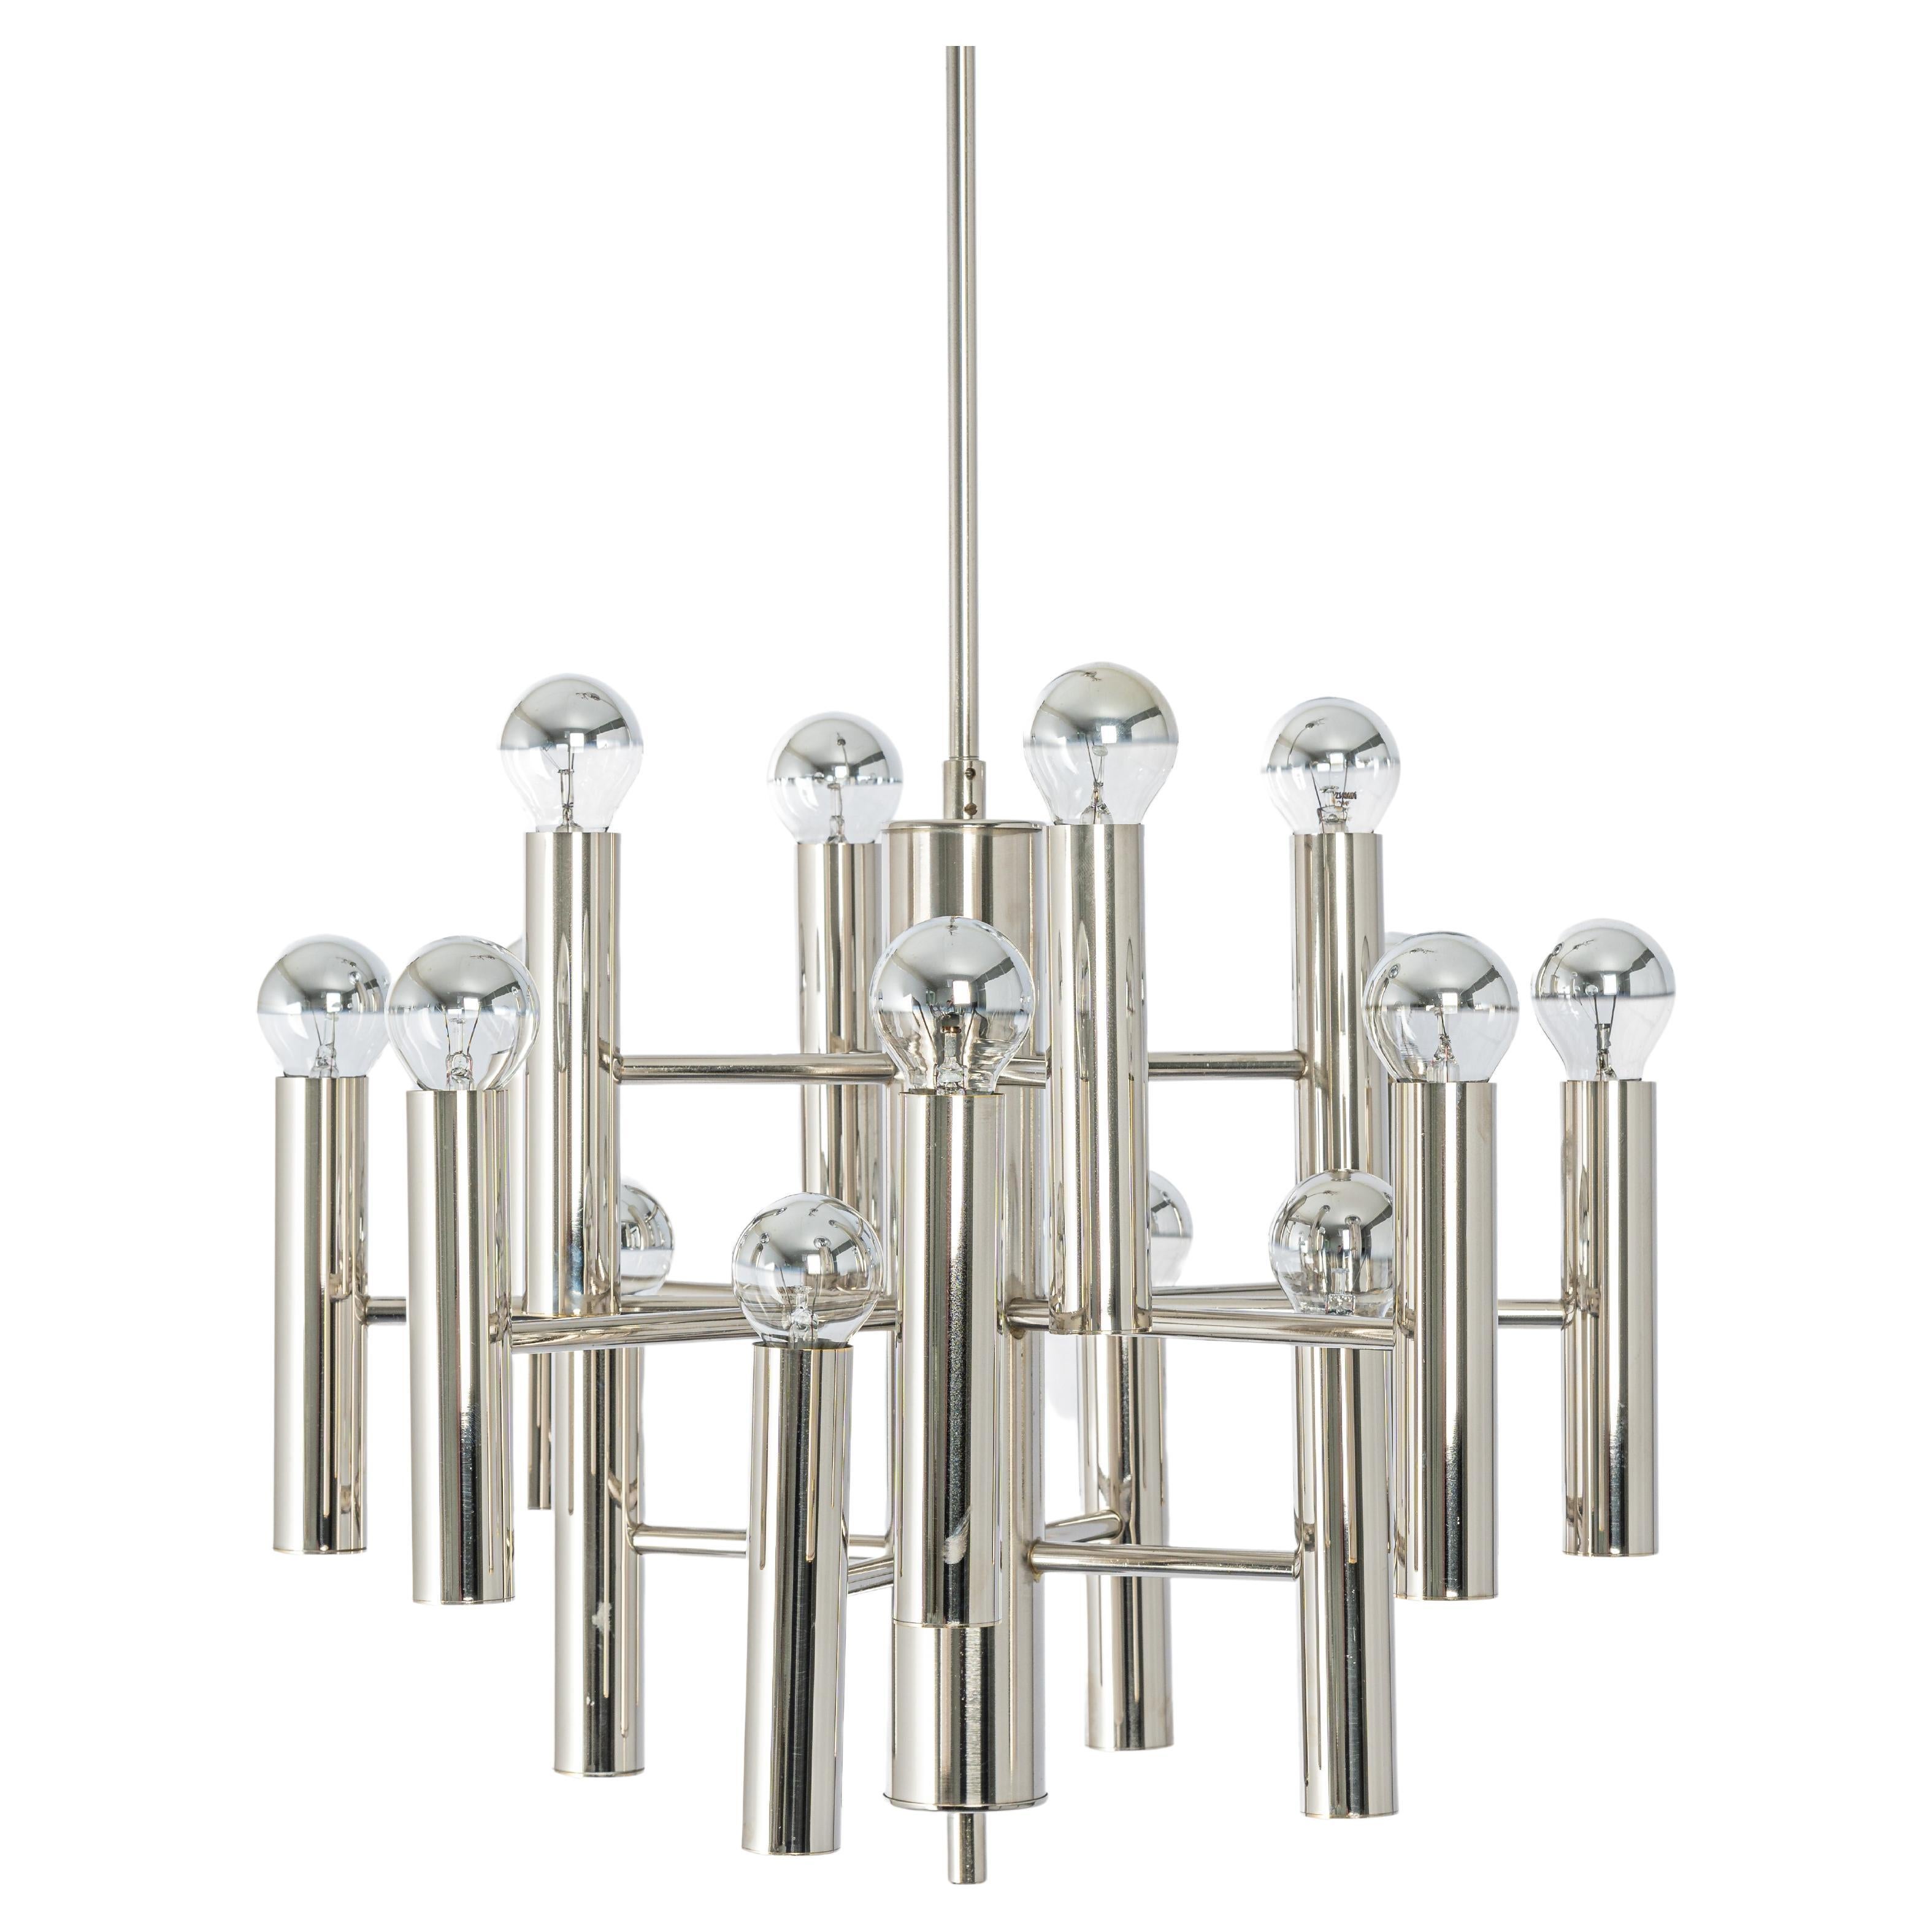 Large Chrome Space Age Sputnik Atomium Chandelier by Cosack, Germany, 1970s For Sale